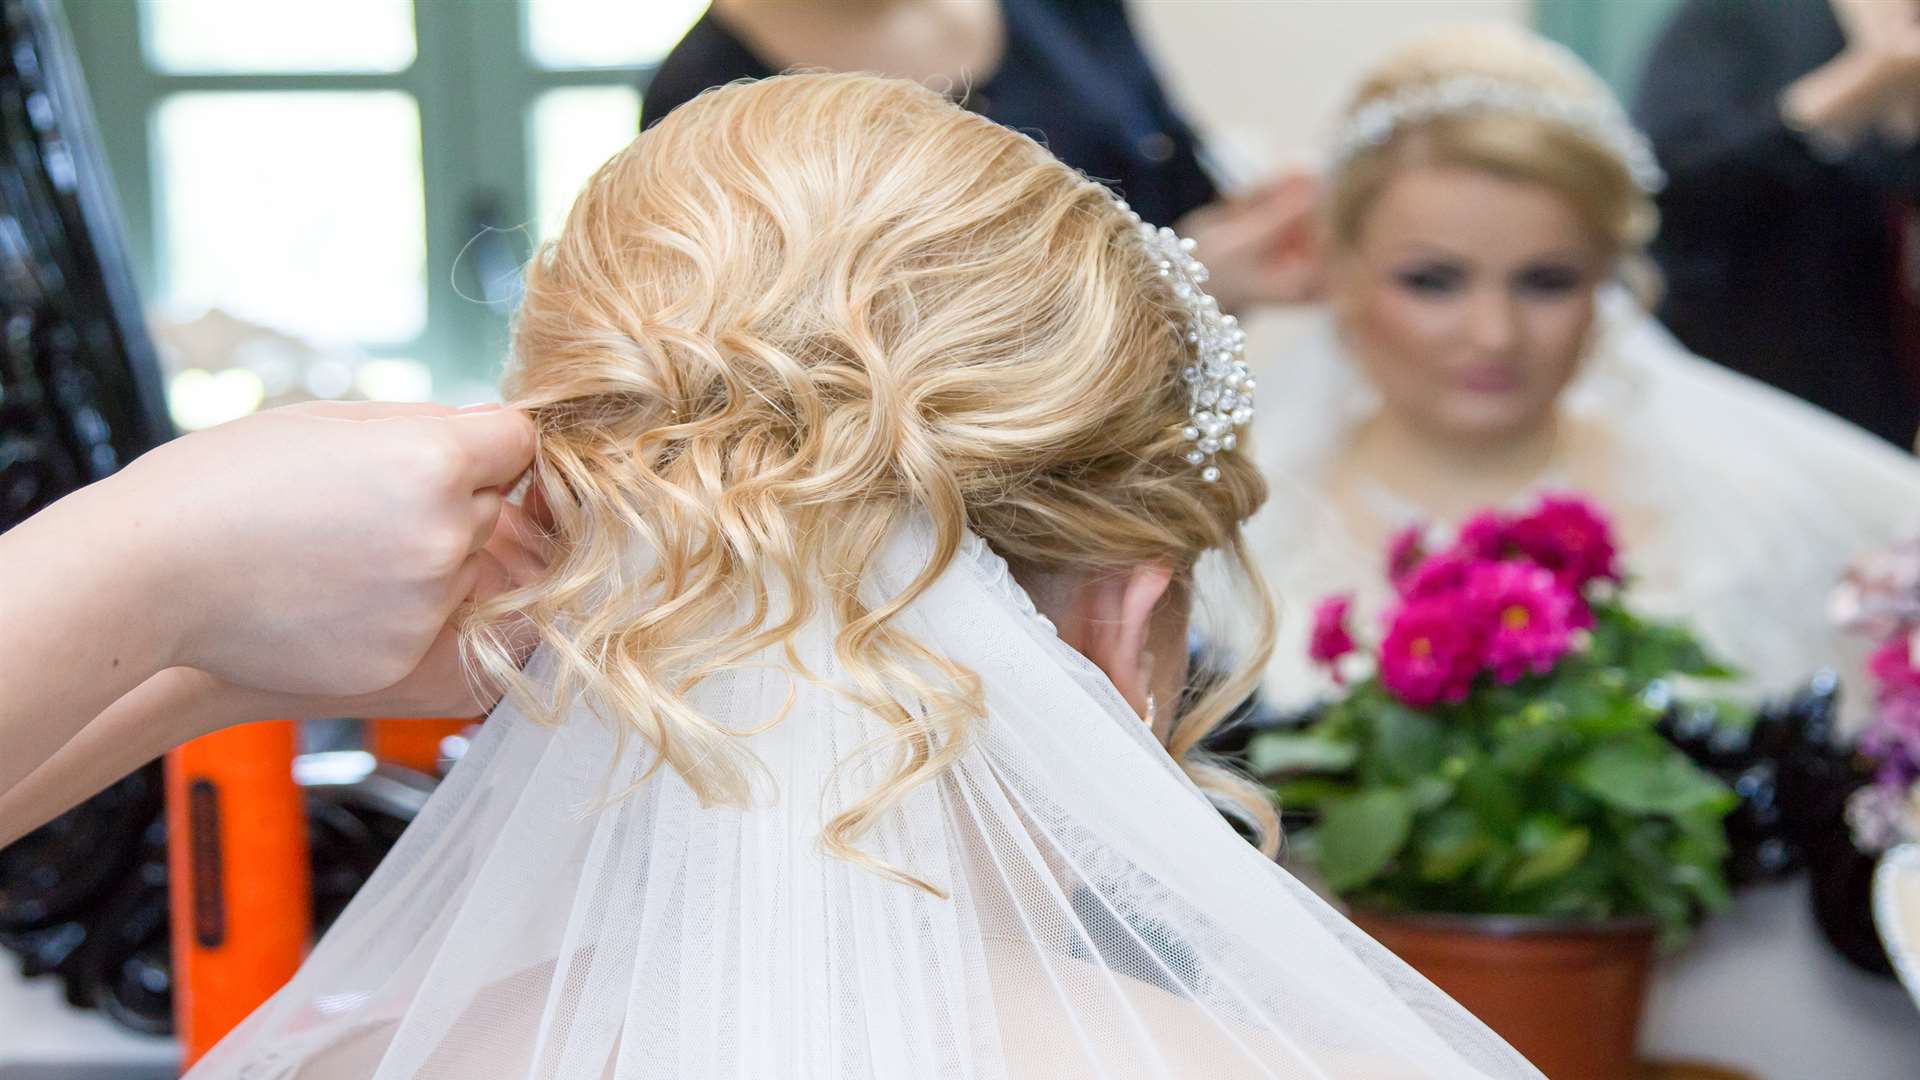 Your hairdresser can help you fix your chosen head dress in place